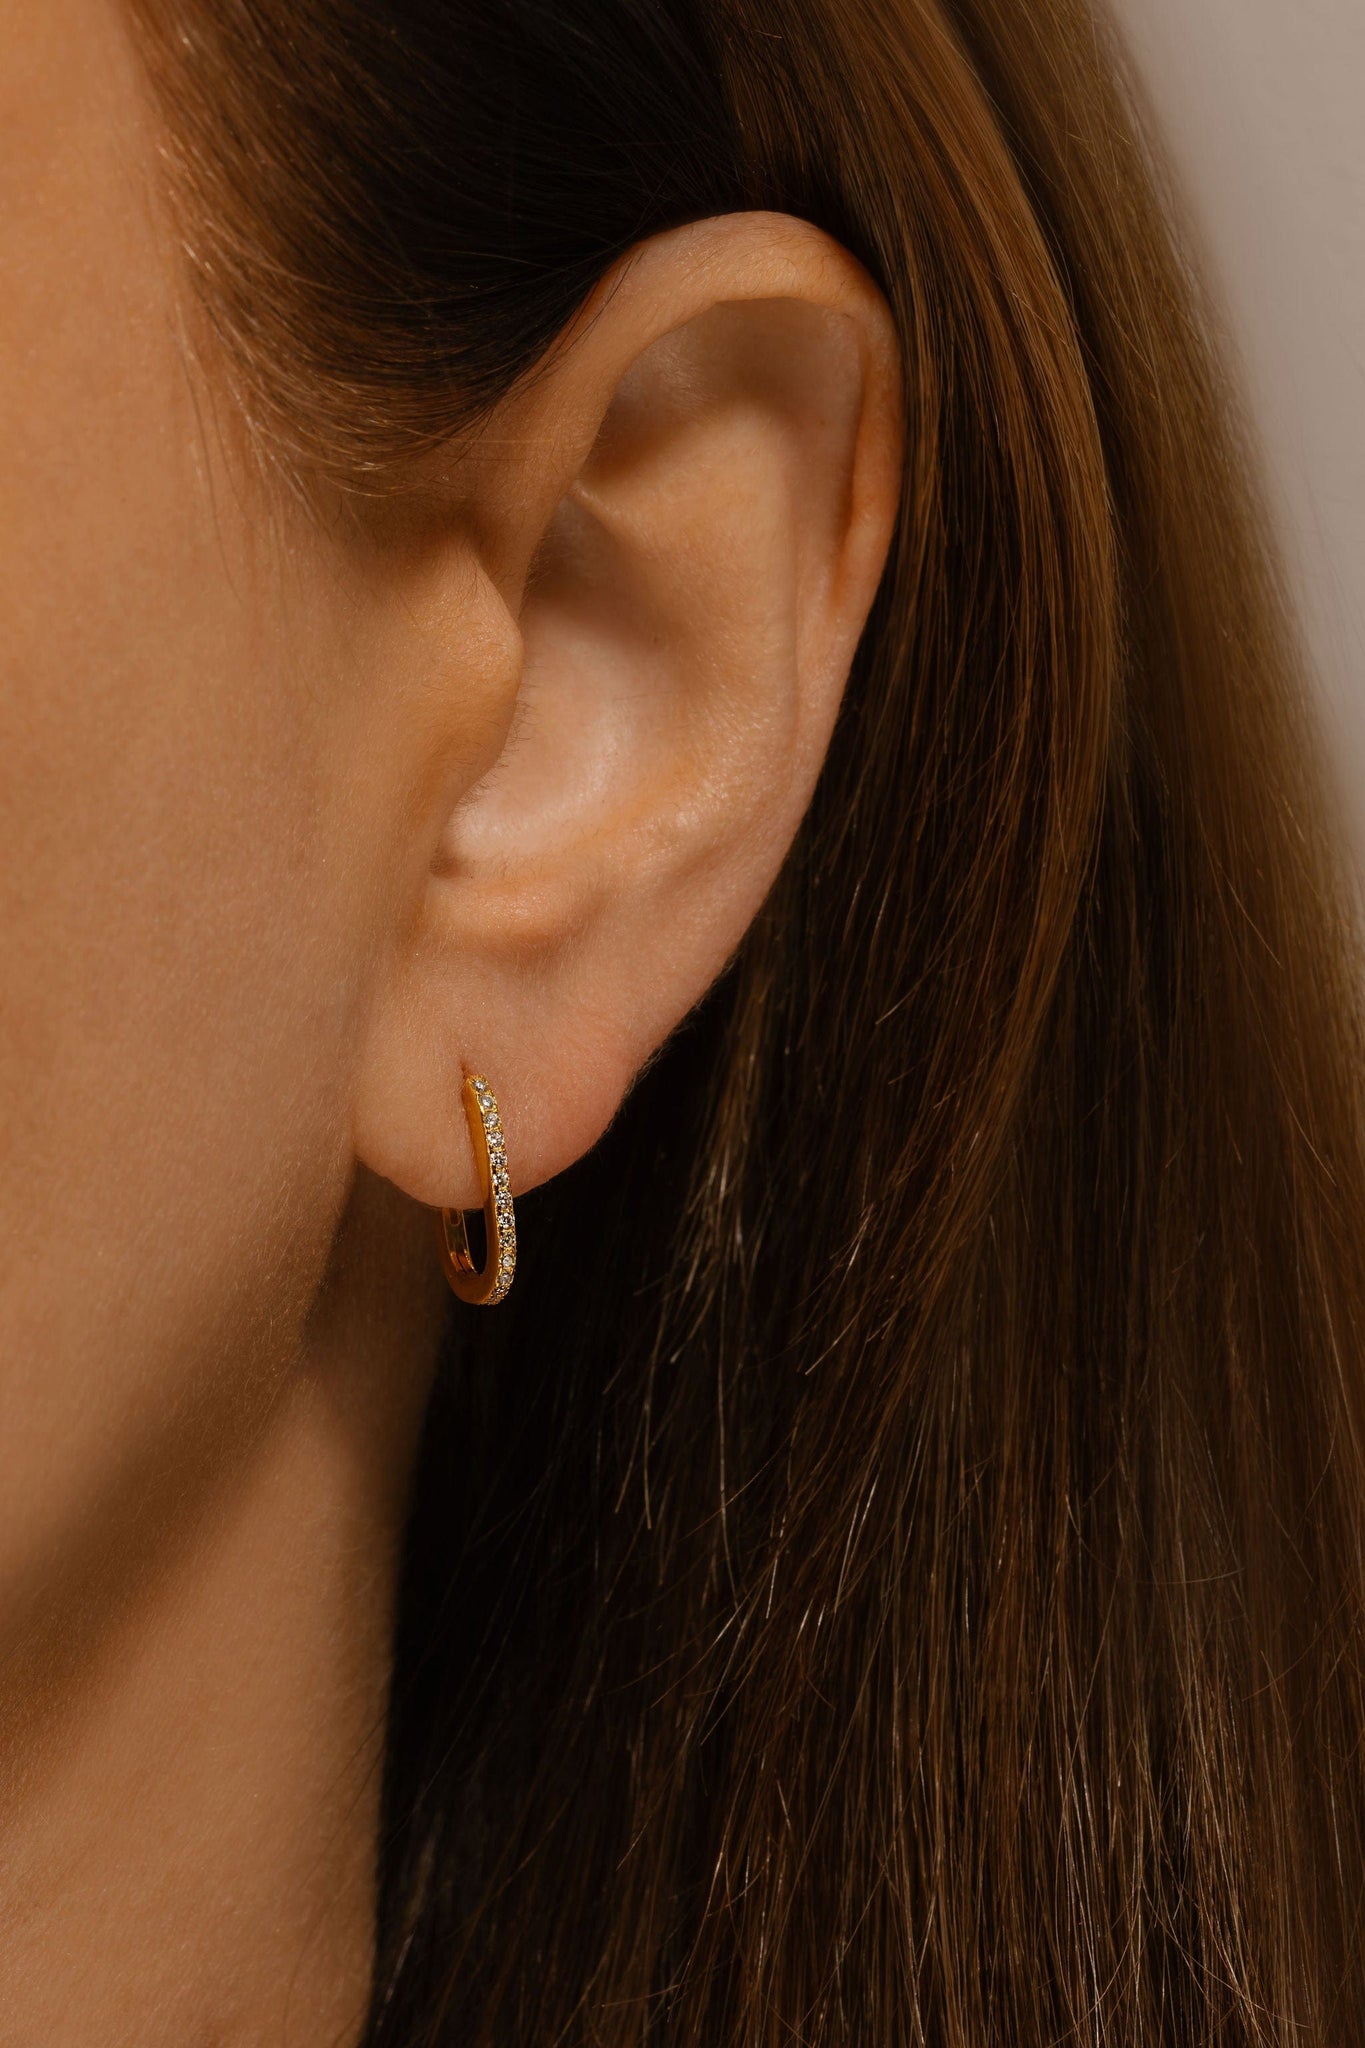 The model wears the Positano Scintilla Huggie, the crystal accents dazzling in a vertical row on her ear. 